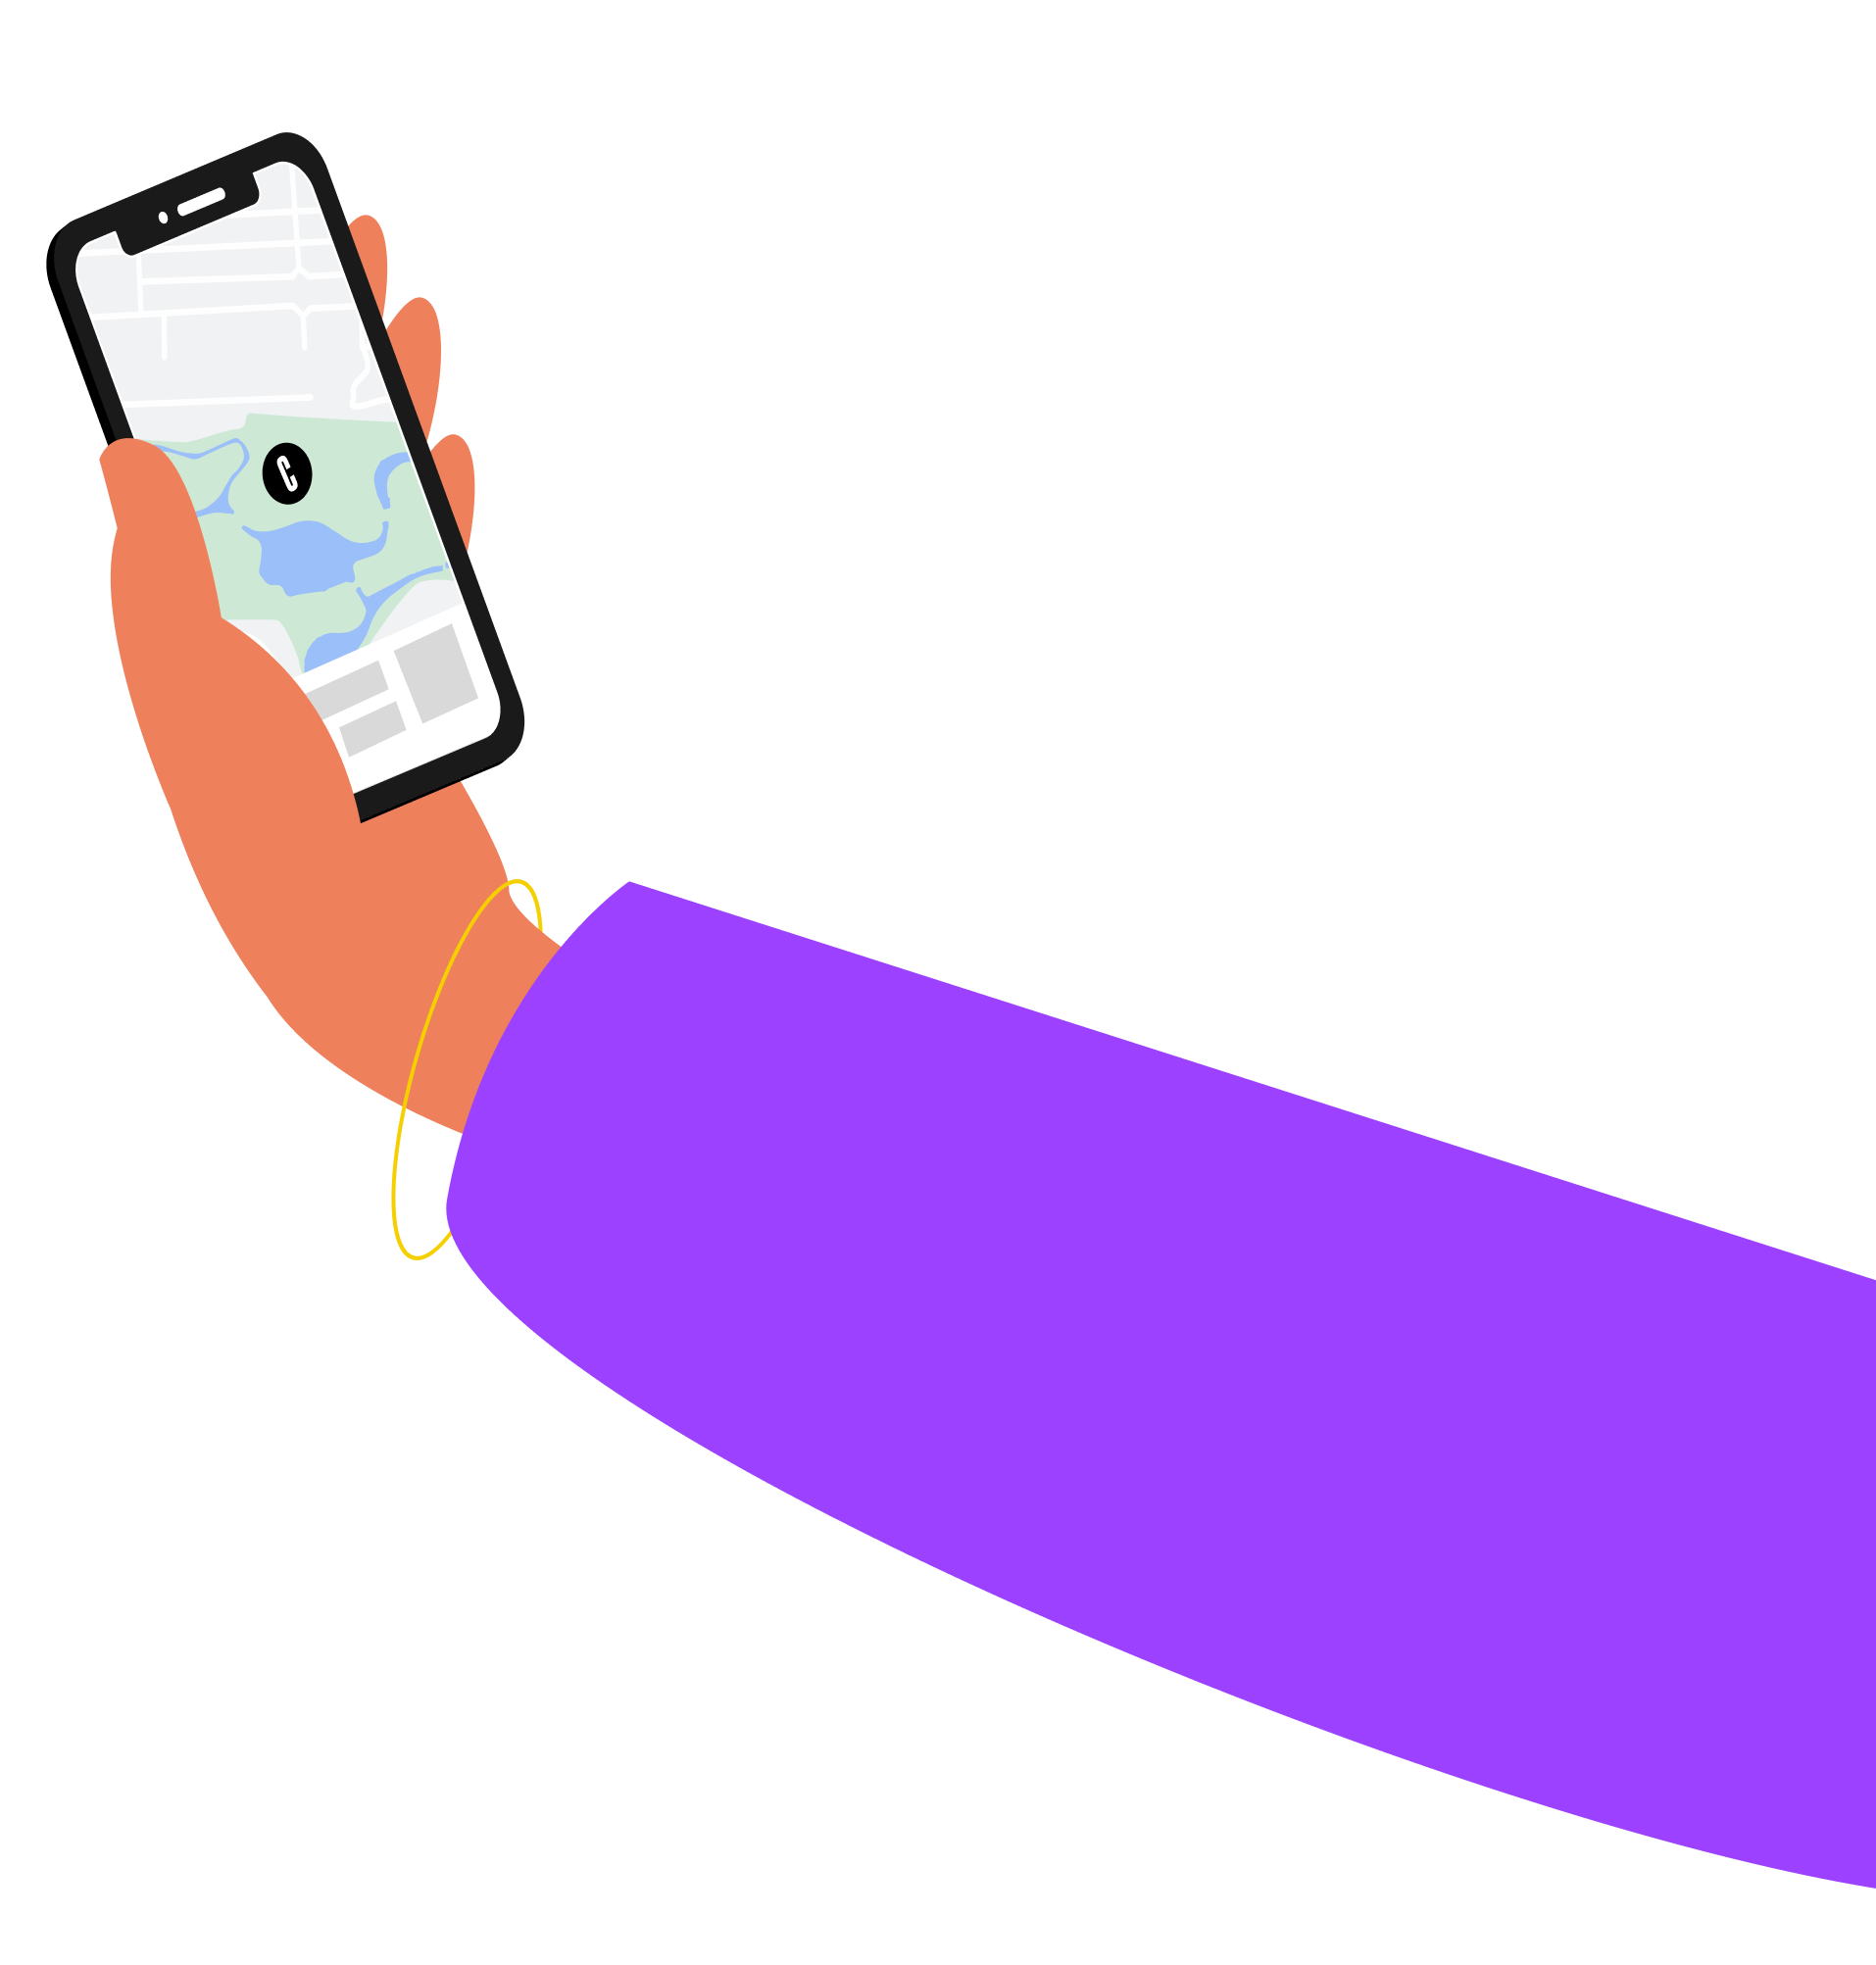 Hand holding a phone